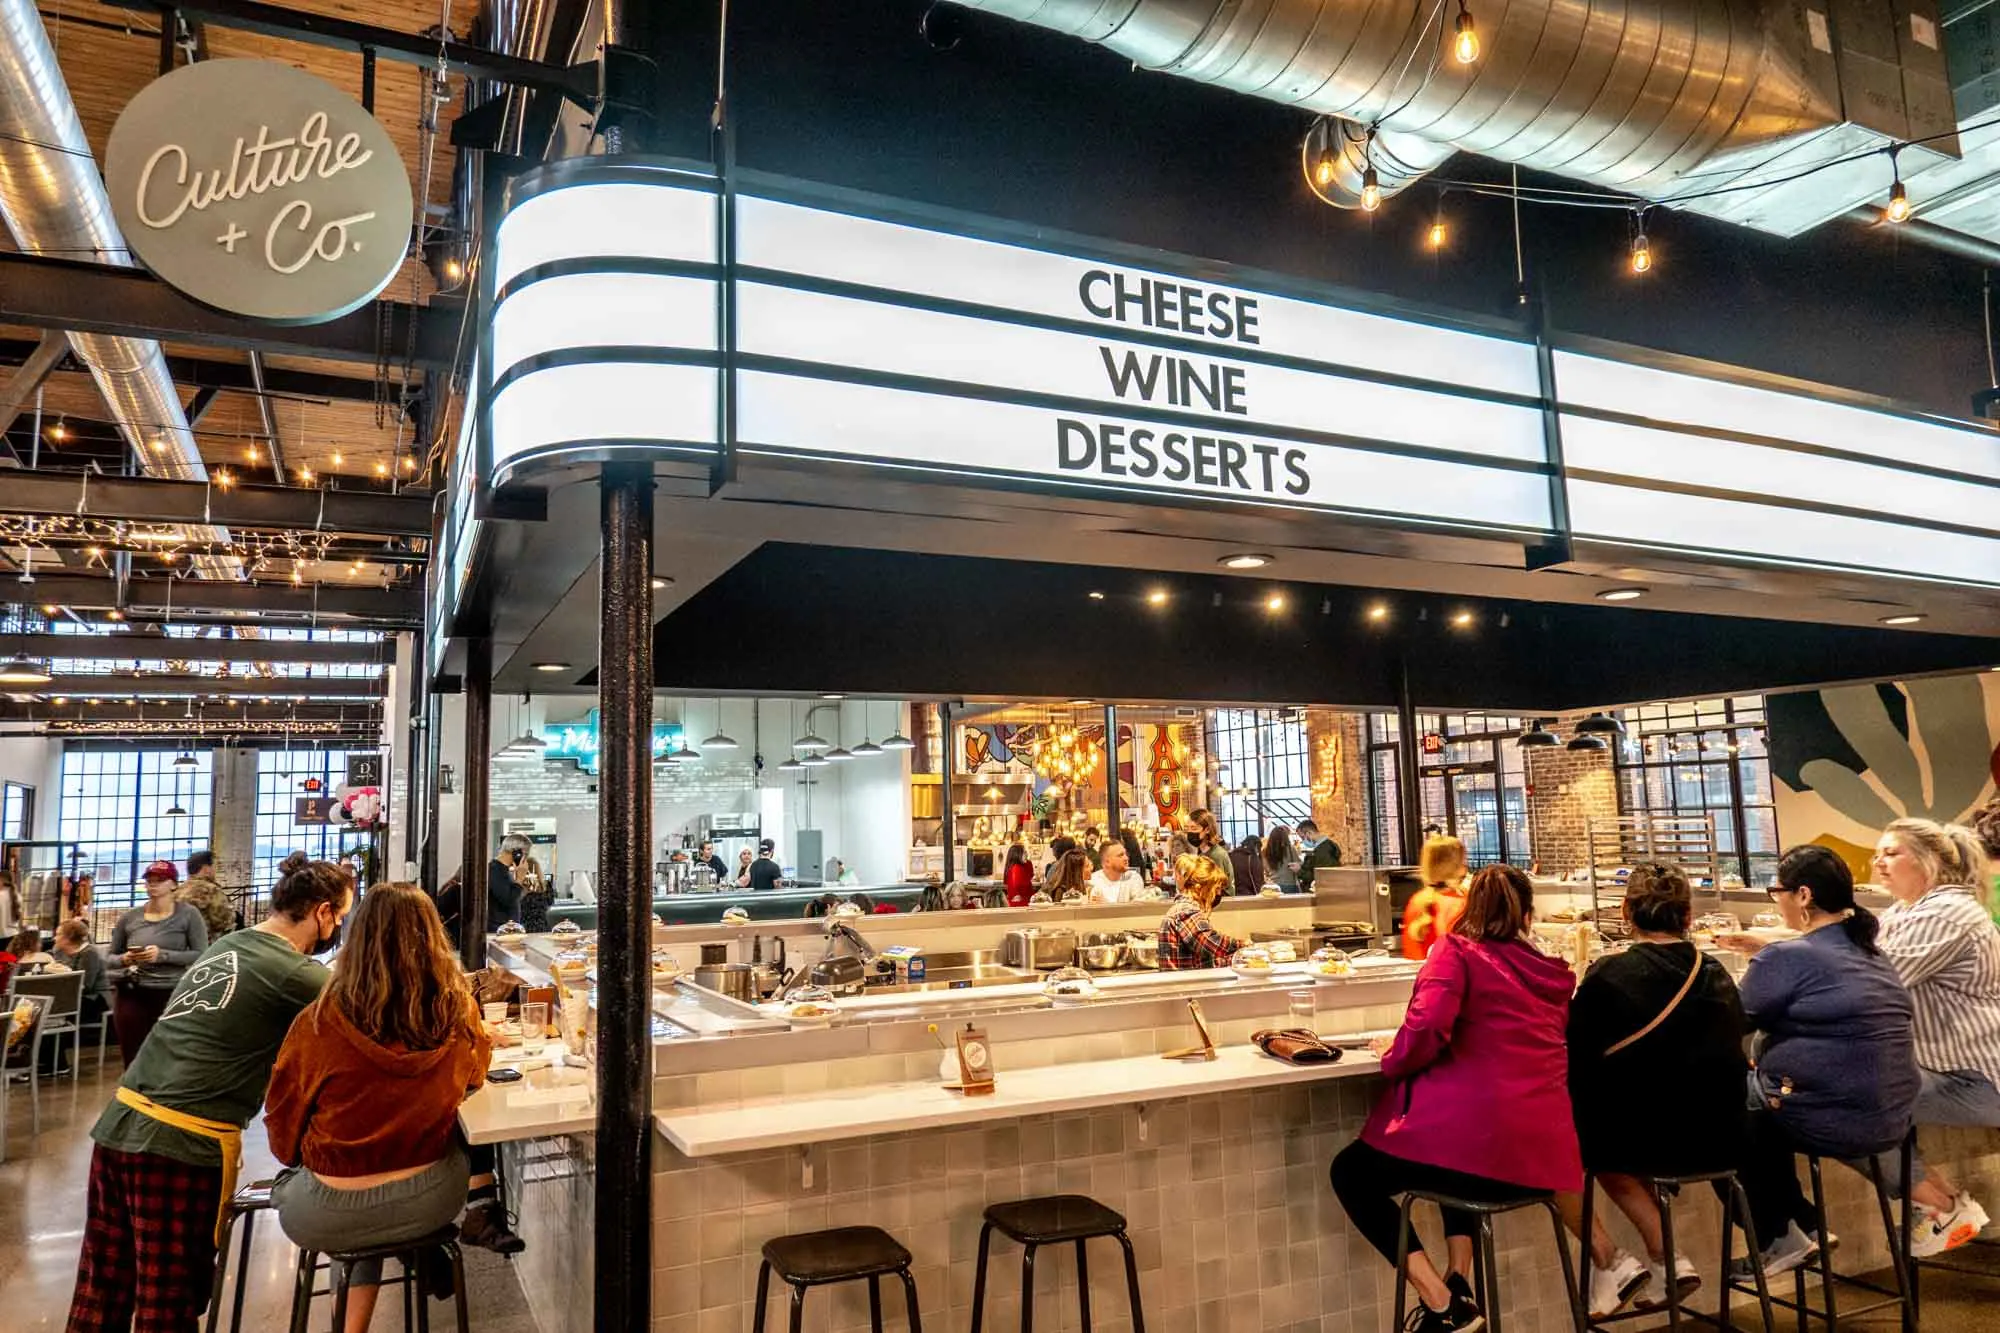 People sitting at a counter under a sign for "Culture + Co.: Cheese, Wine, Desserts"